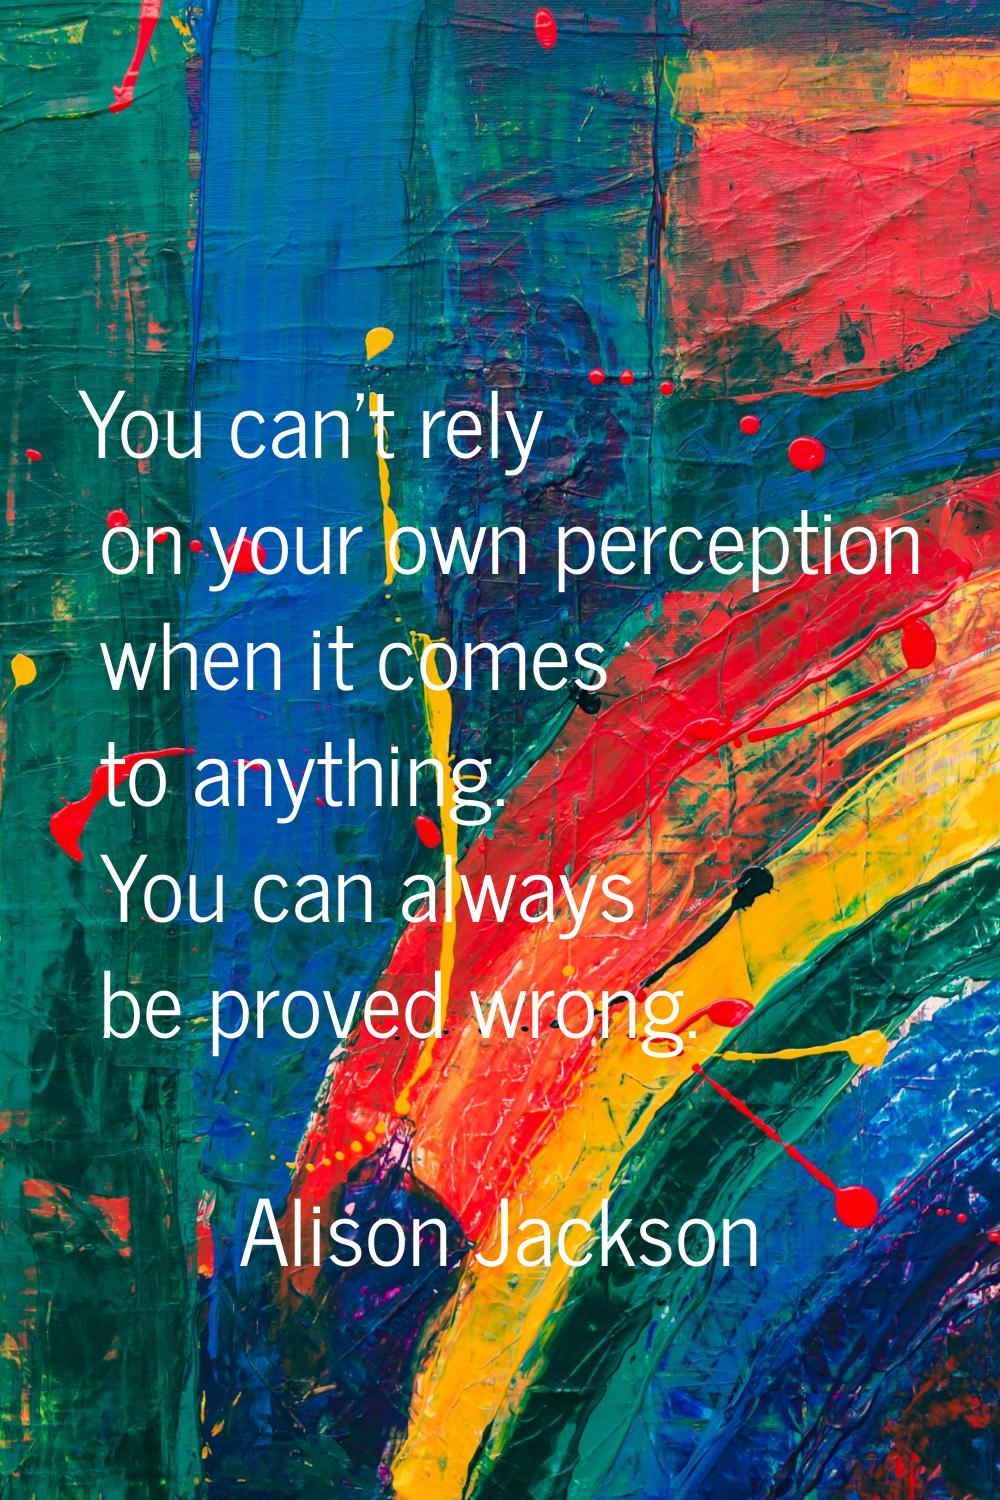 You can't rely on your own perception when it comes to anything. You can always be proved wrong.